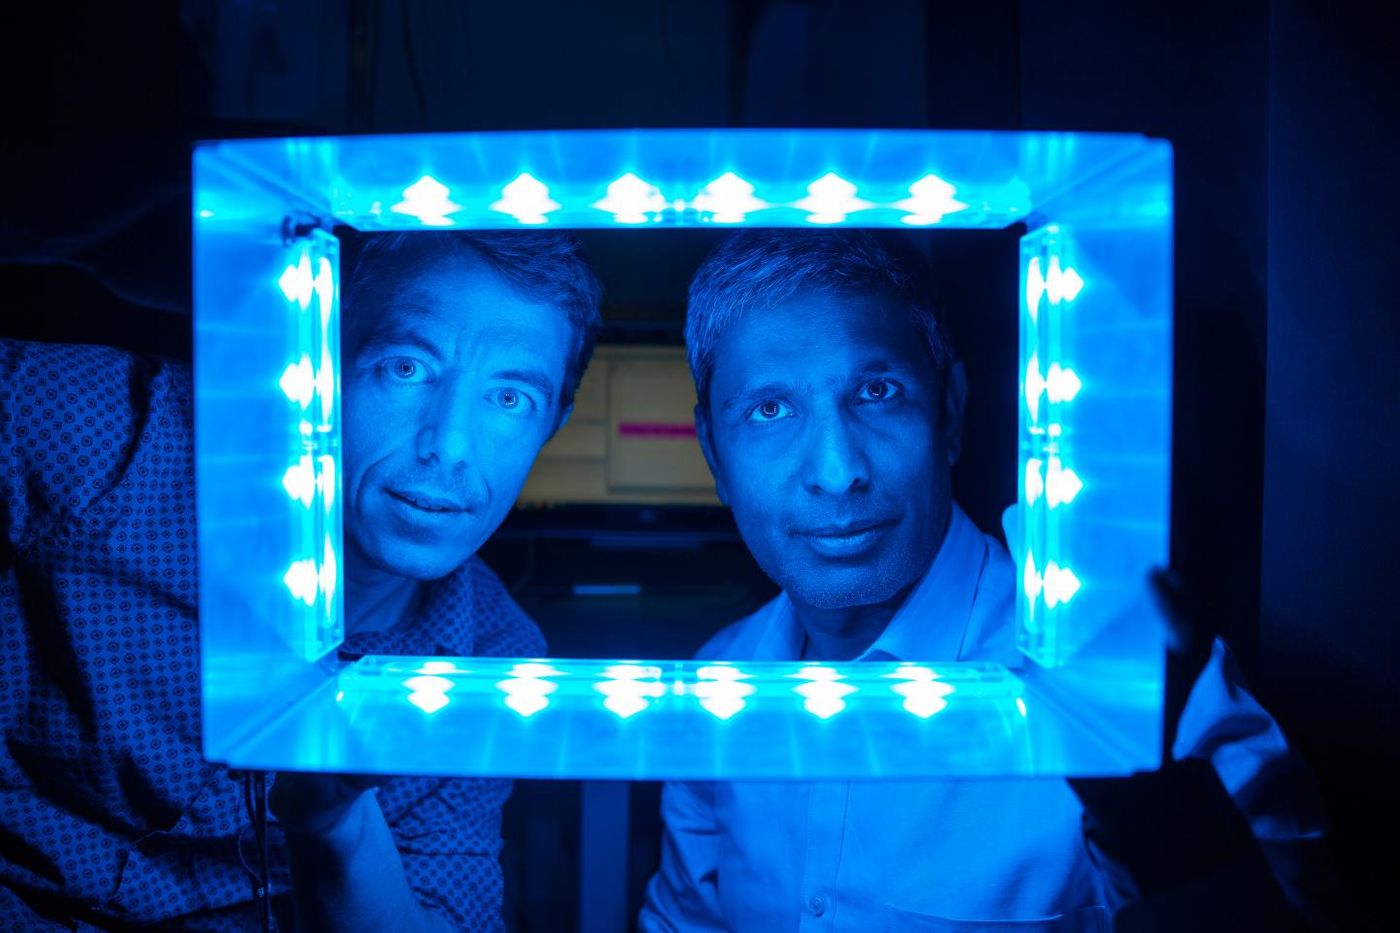 From left: Salk scientists Ludovic Mure and Satchin Panda uncover how certain retinal cells respond to artificial illumination. / Credit: Salk Institute